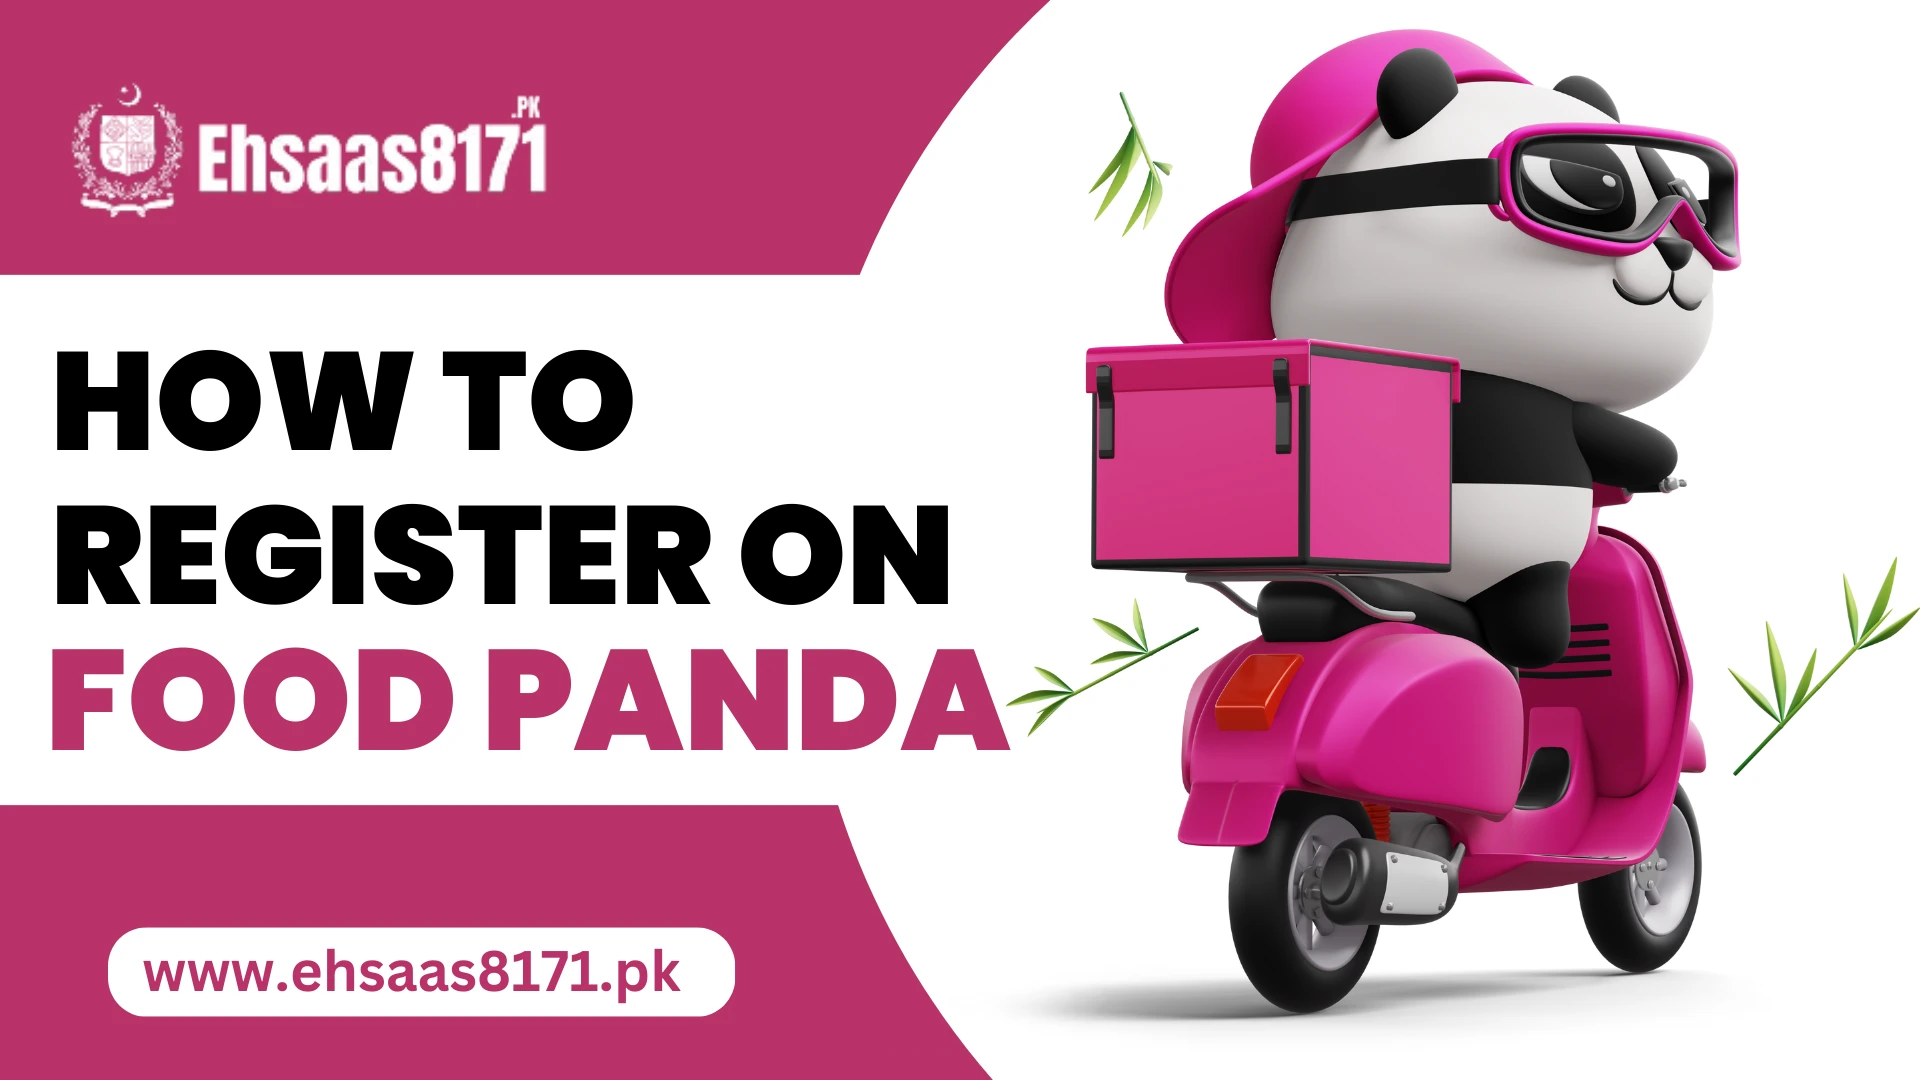 How to Register on Food Panda